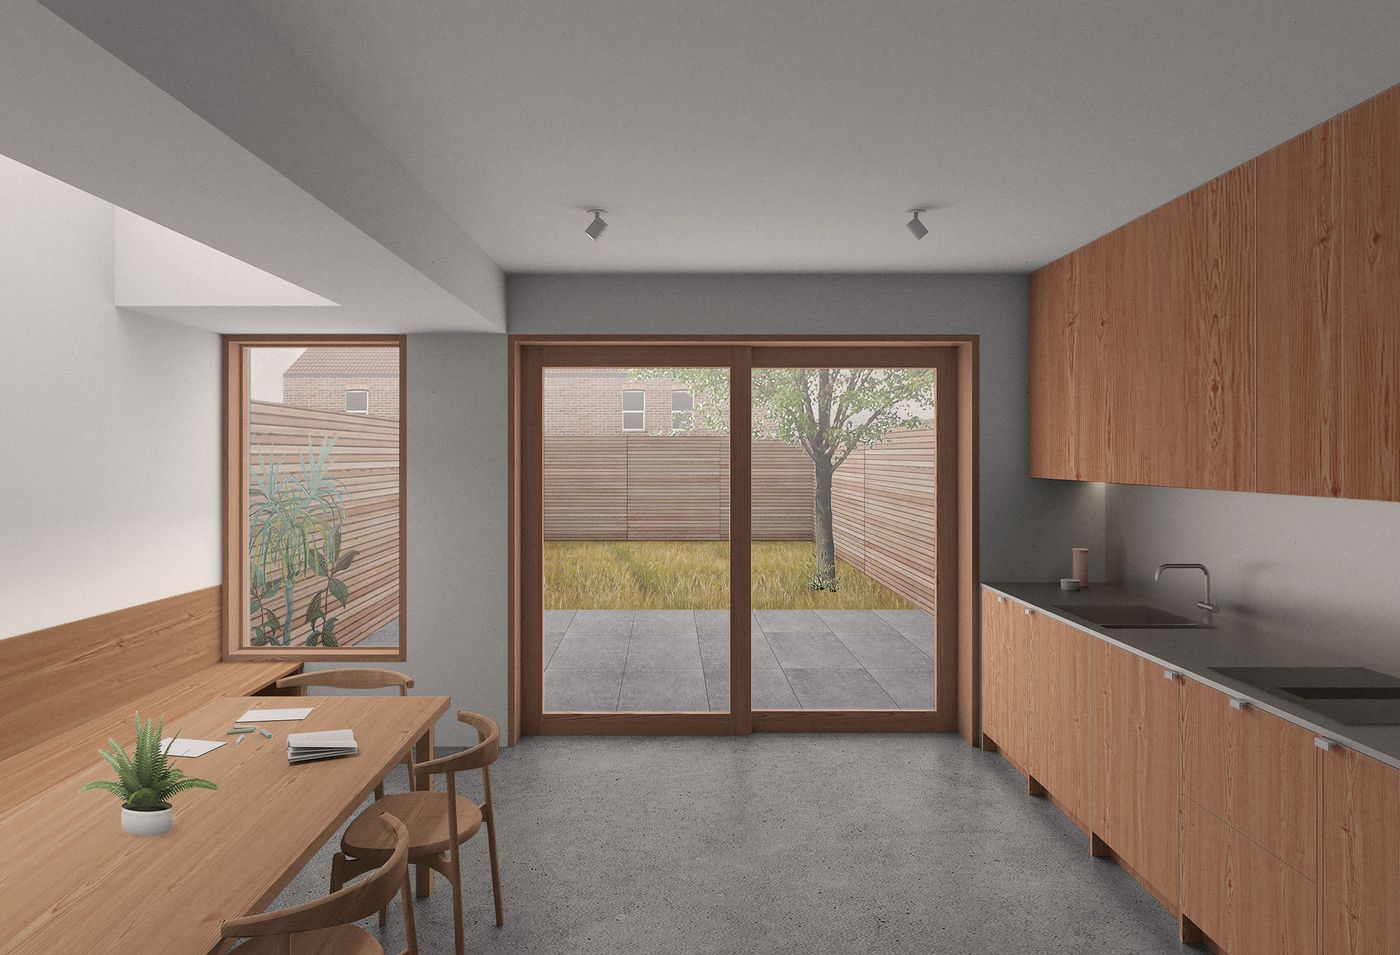 Interior view of the proposed kitchen and dining extension for From Works' rear extension proposal Bristol.